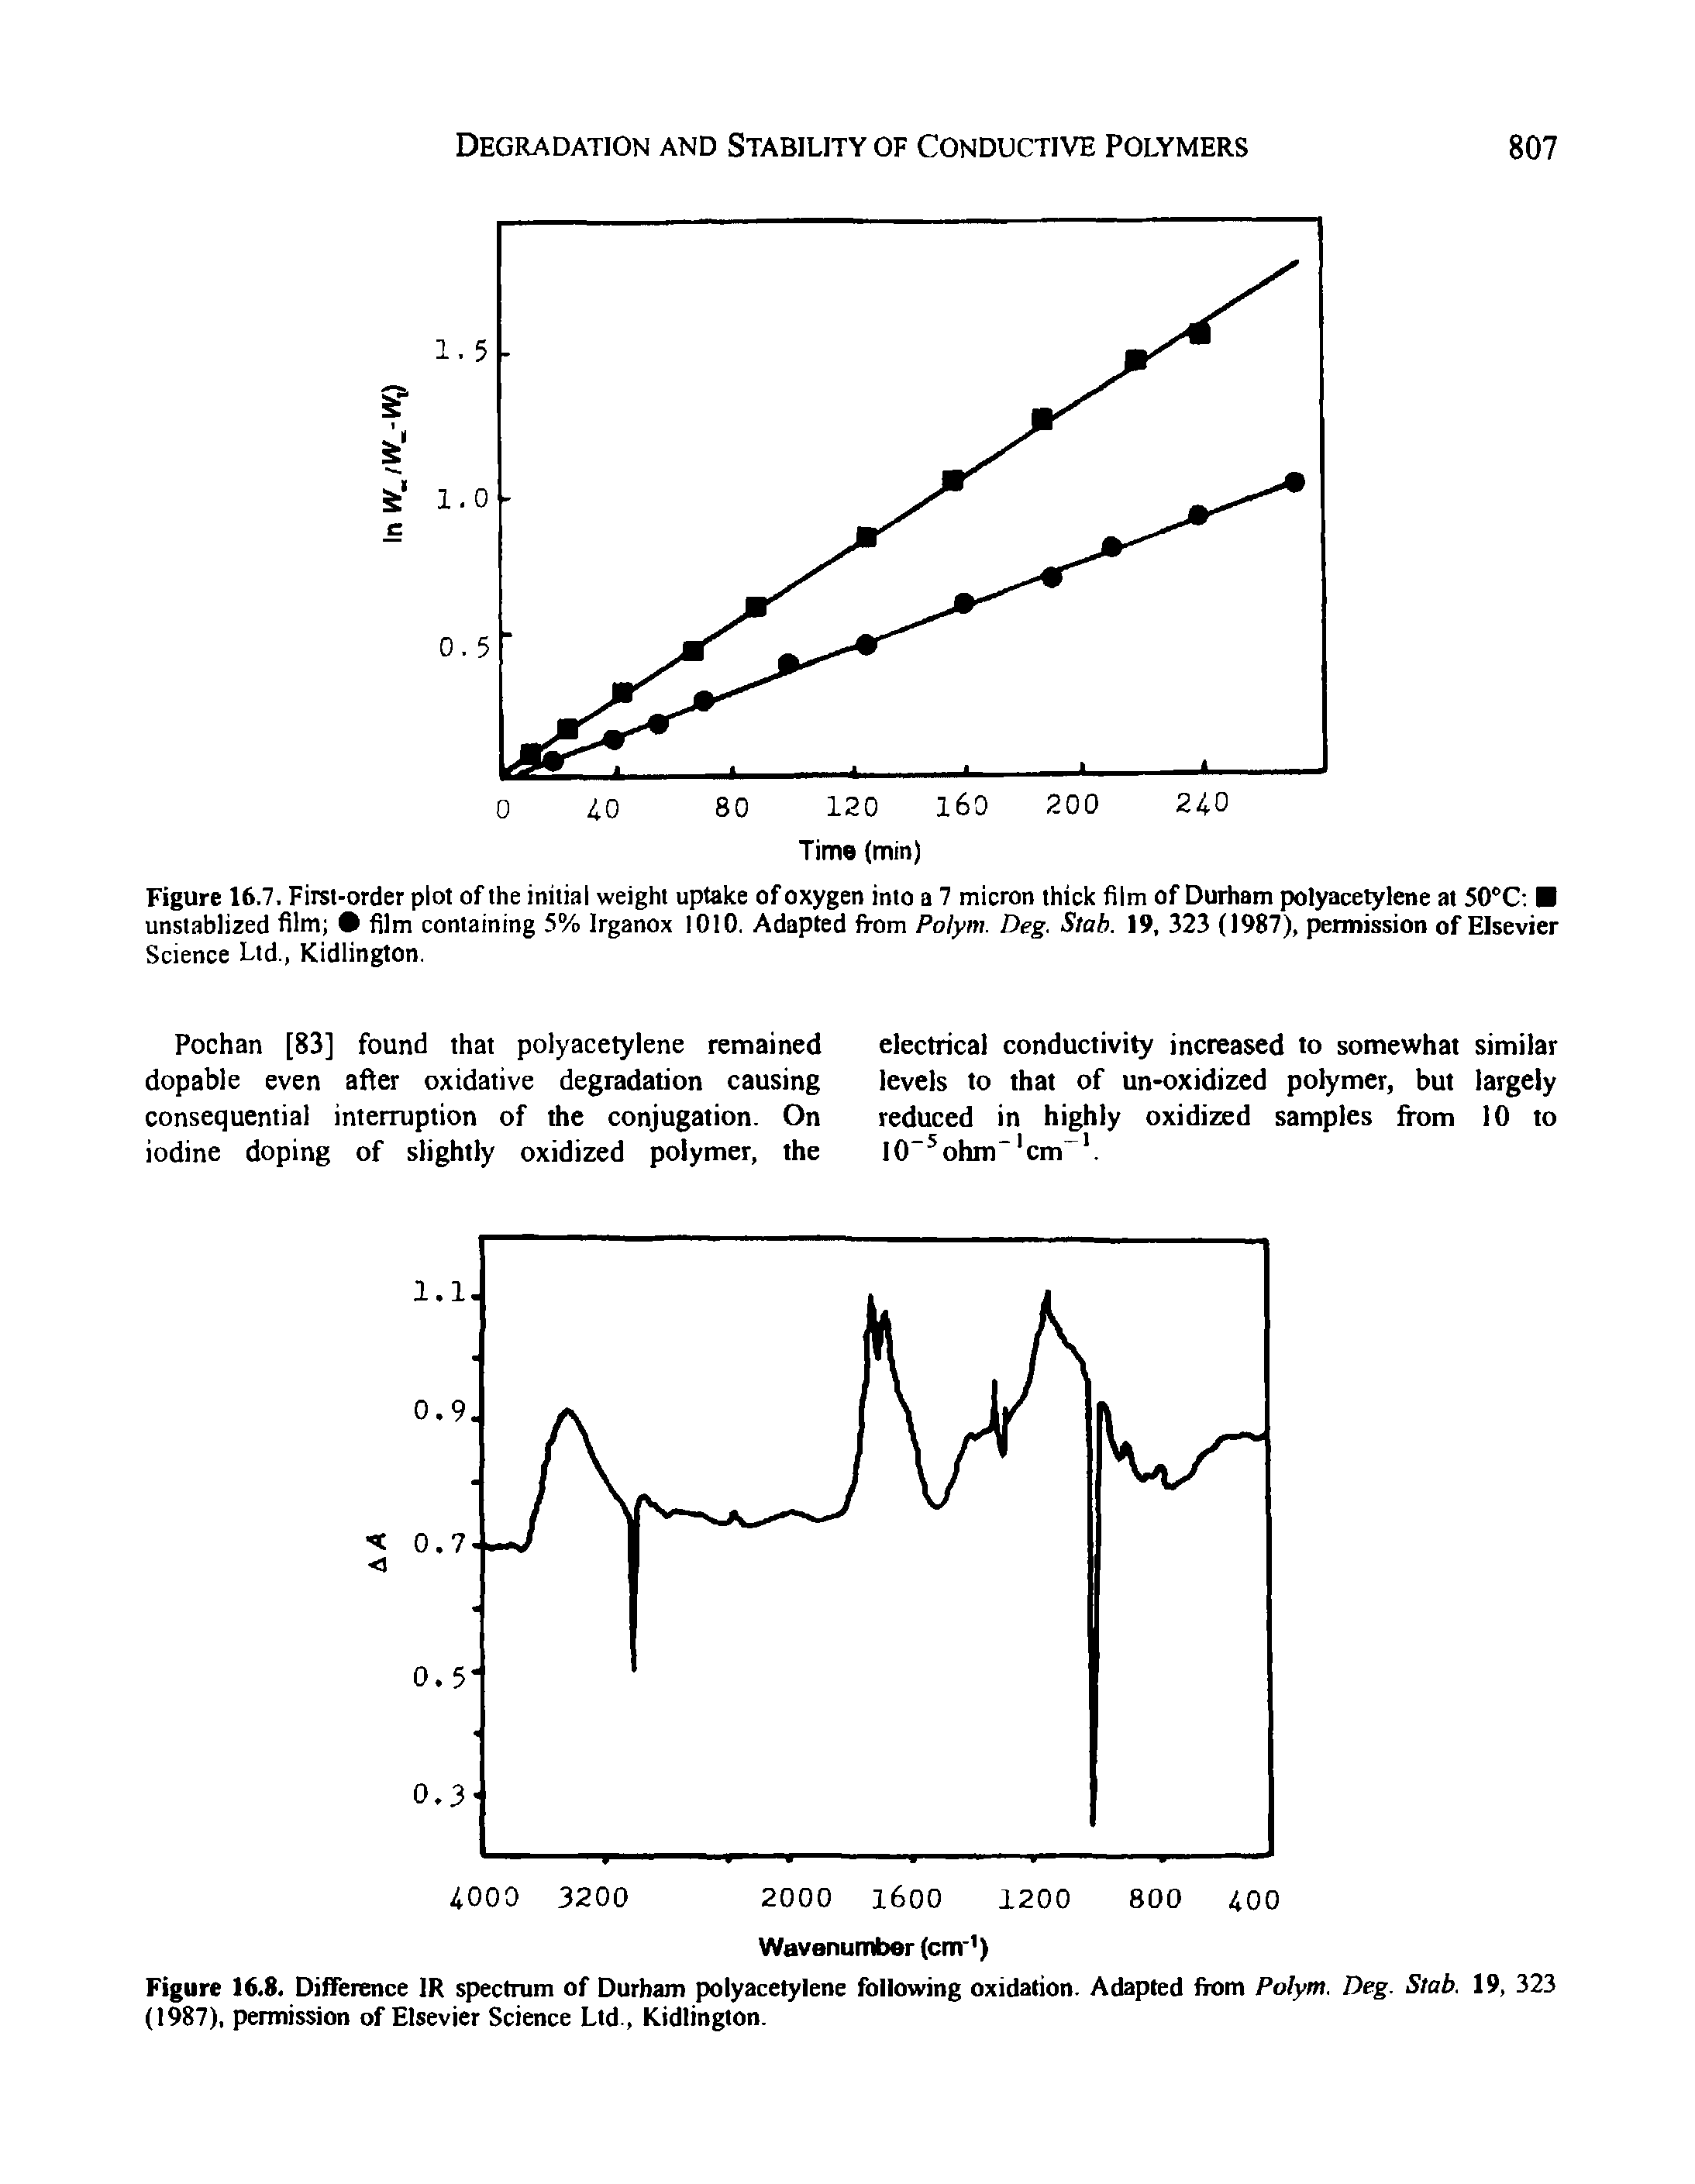 Figure 16.7. First-order plot of the initial weight uptake of oxygen into a 7 micron thick film of Durham polyacetylene at SO C unstablized film film containing 5% Irganox 1010. Adapted from Polym. Deg. Stab. 19, 323 (1987), permission of Elsevier Science Ltd., Kidlington.